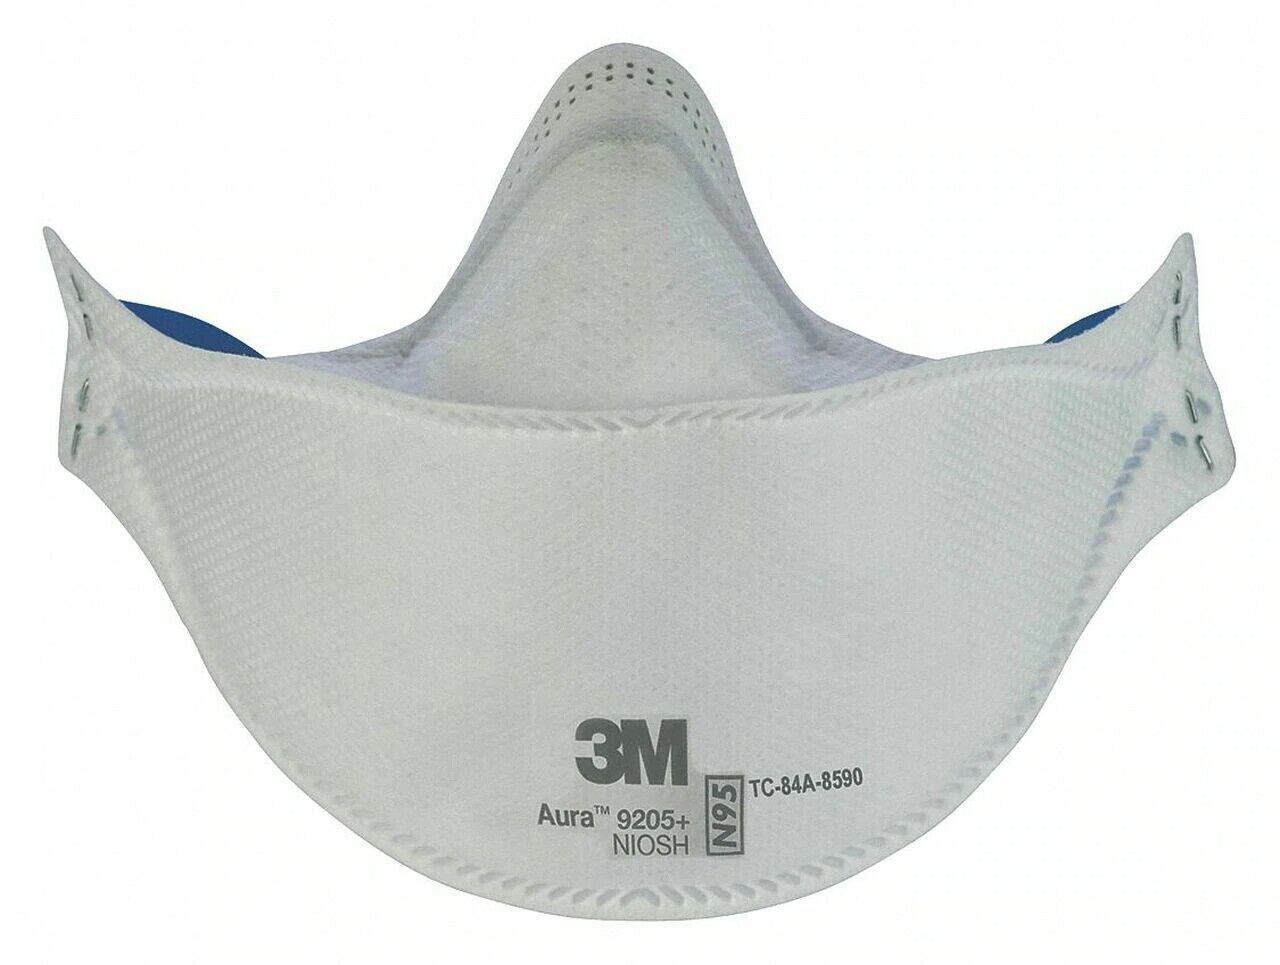 *50-Pack* 3M Aura N95 Protective Disposable Respirator Face Mask 9205+ 3M 9205+ 9205 - фотография #2